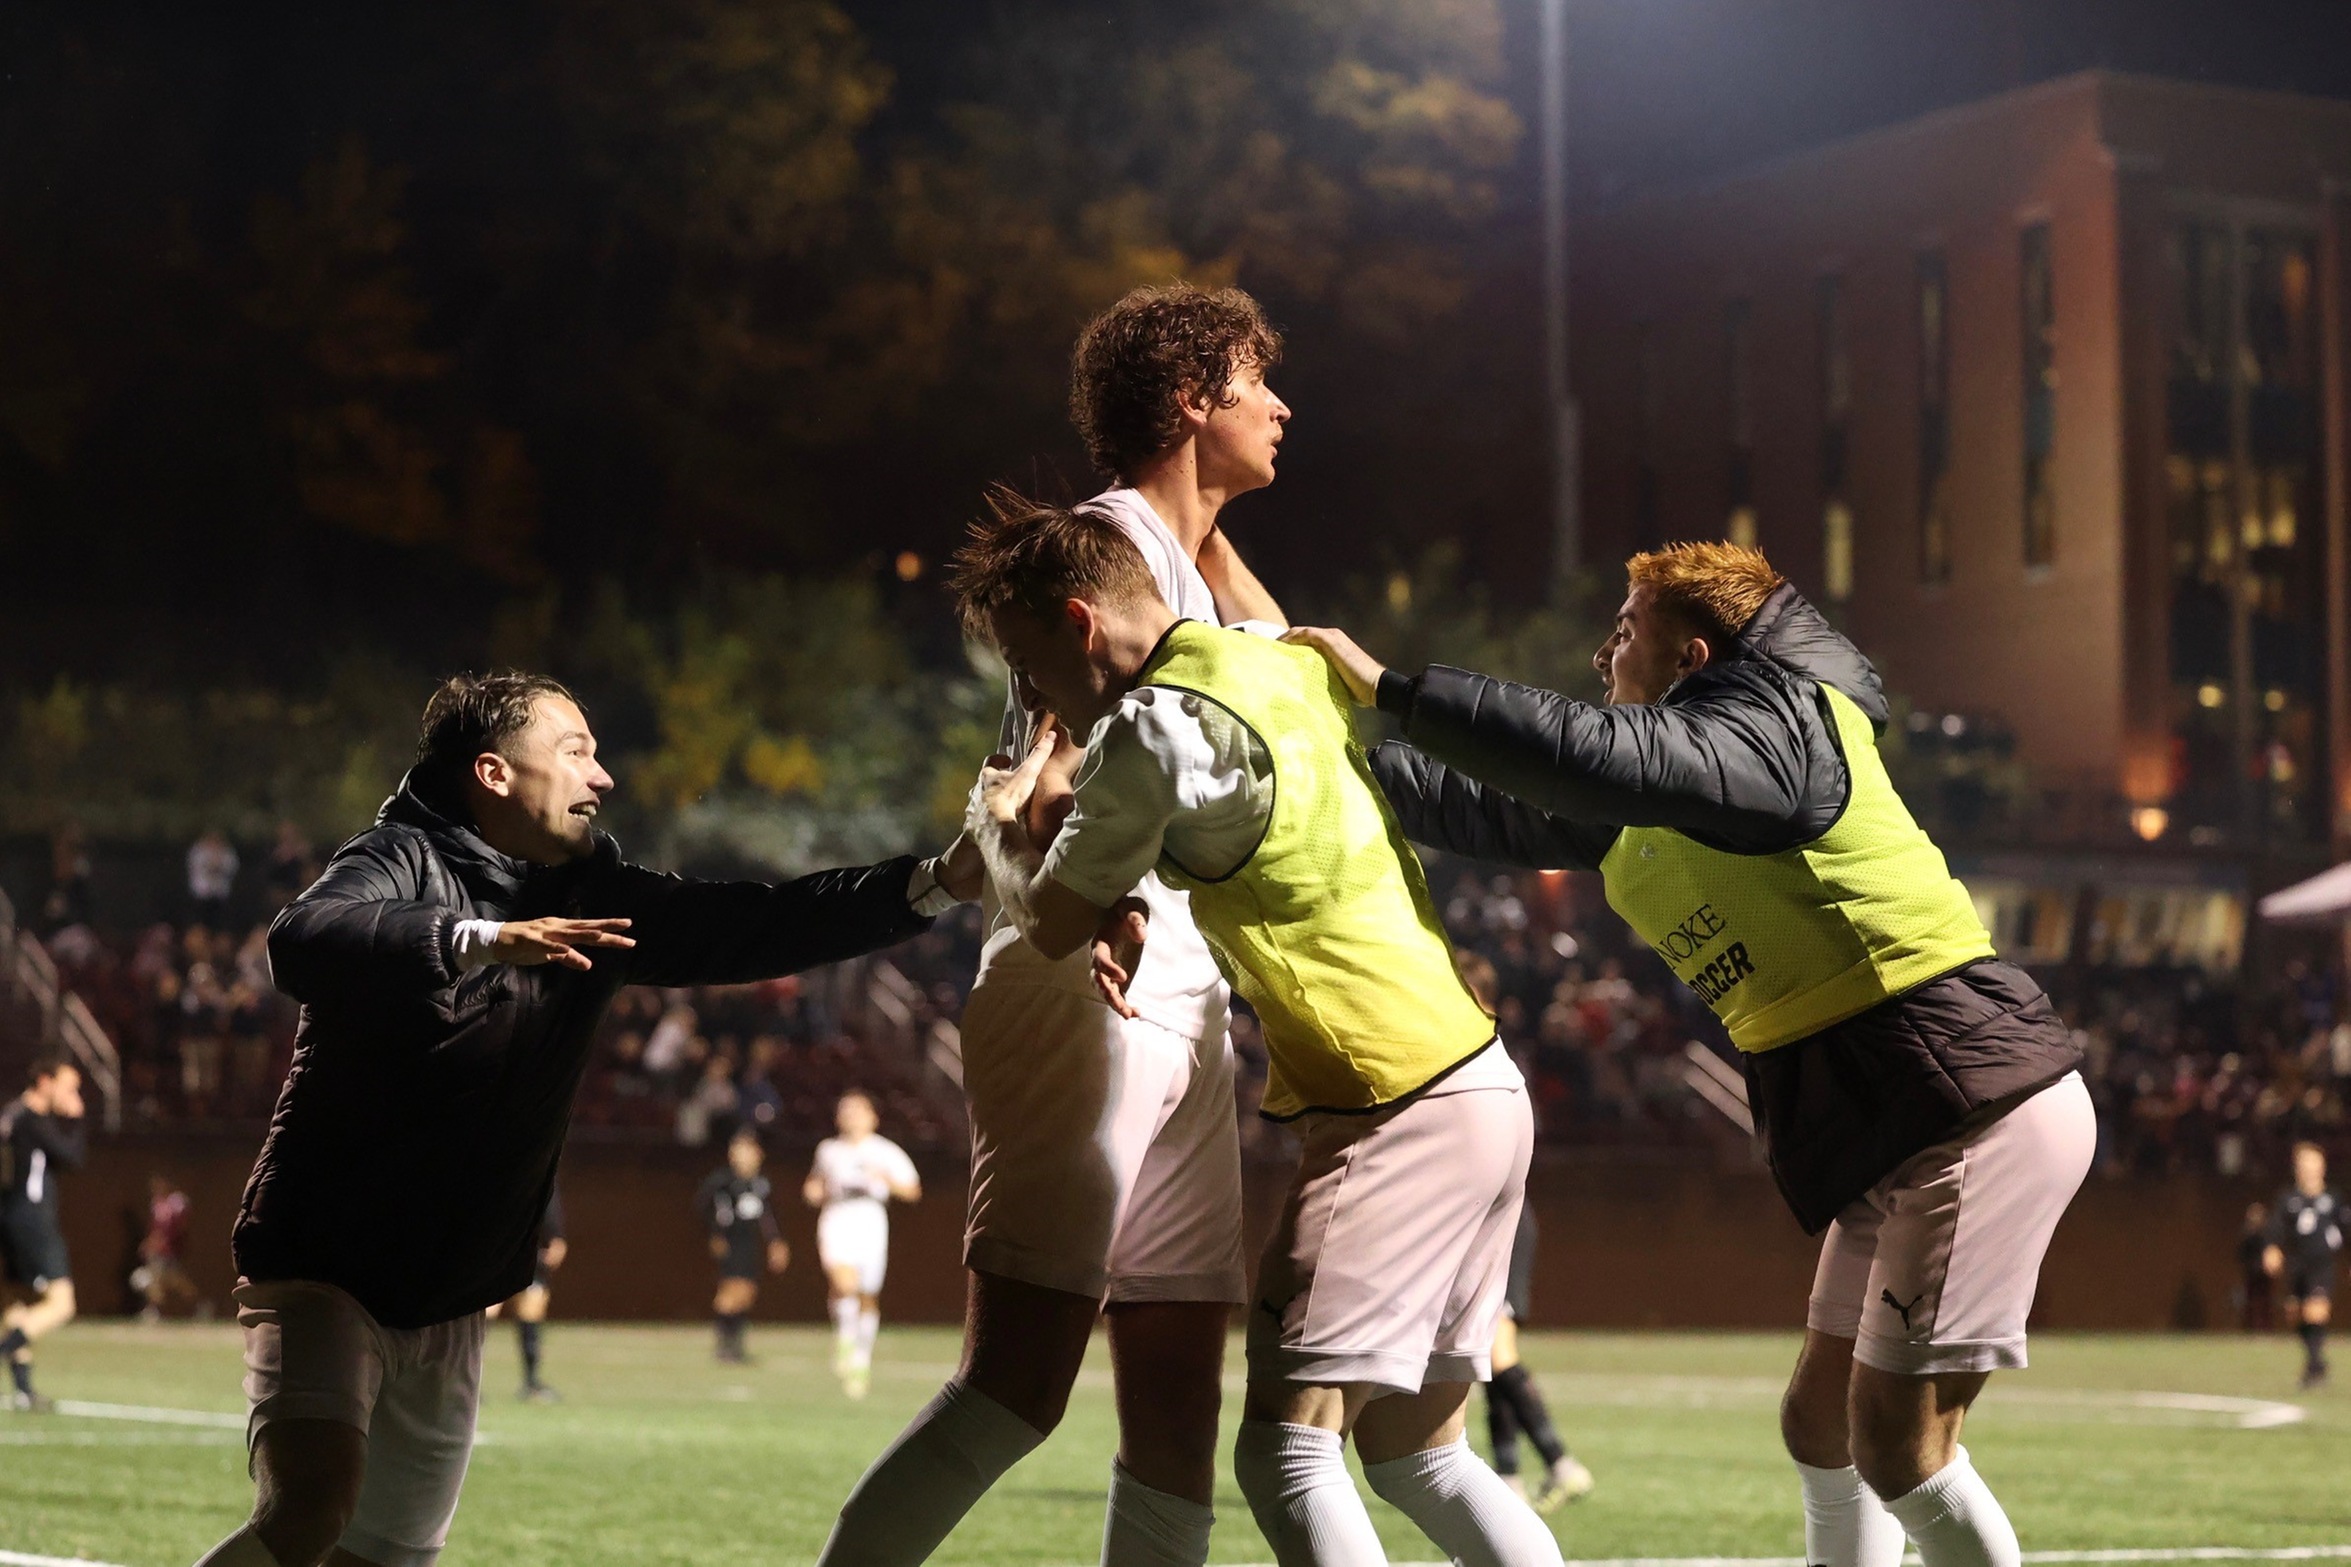 Maroons Advance to ODAC Championship With 2-0 Win Over Hampden-Sydney